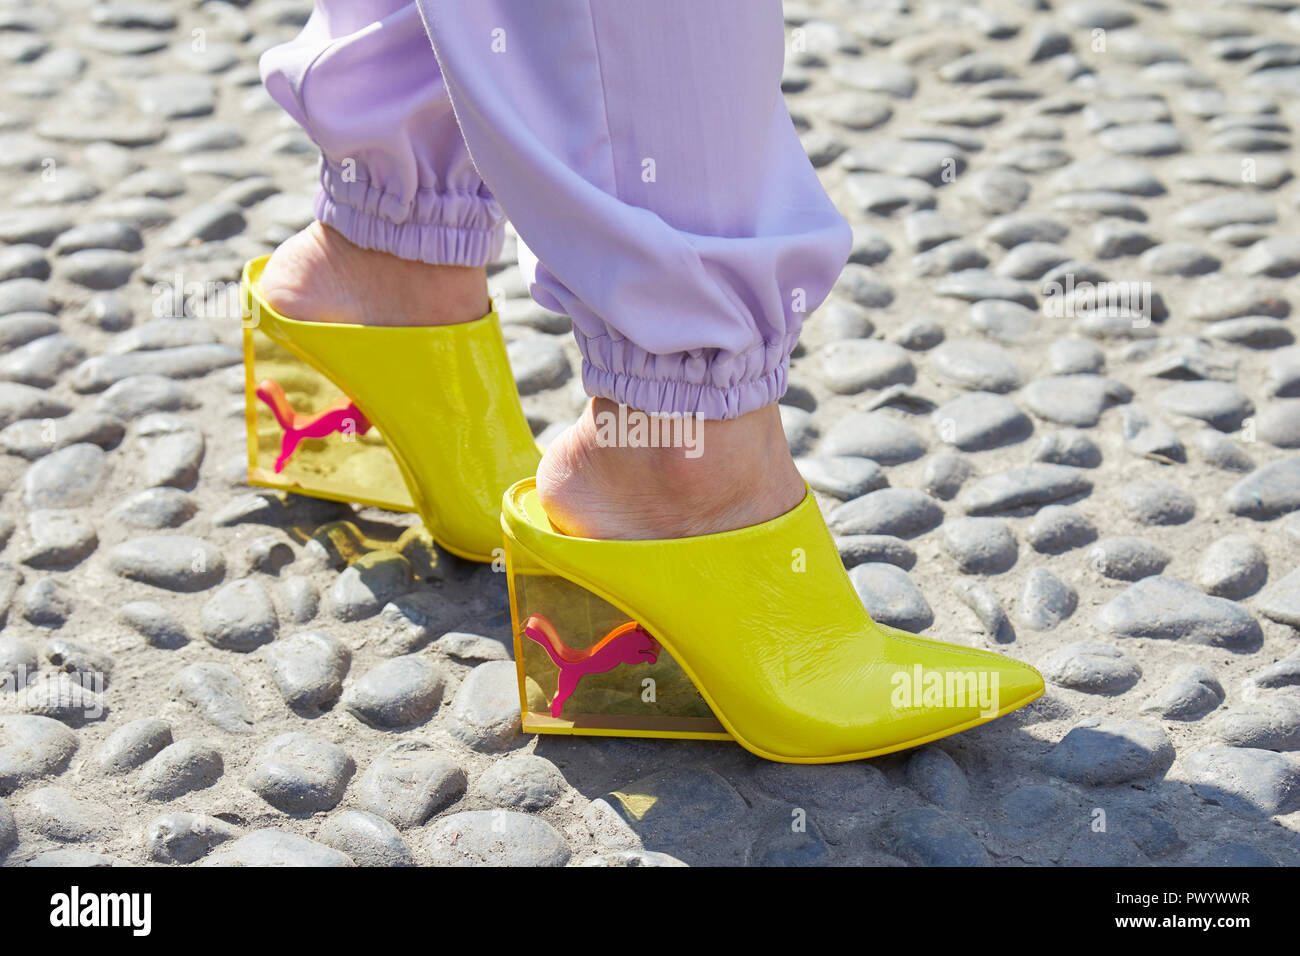 Puma Shoes High Resolution Stock Photography and Images - Alamy